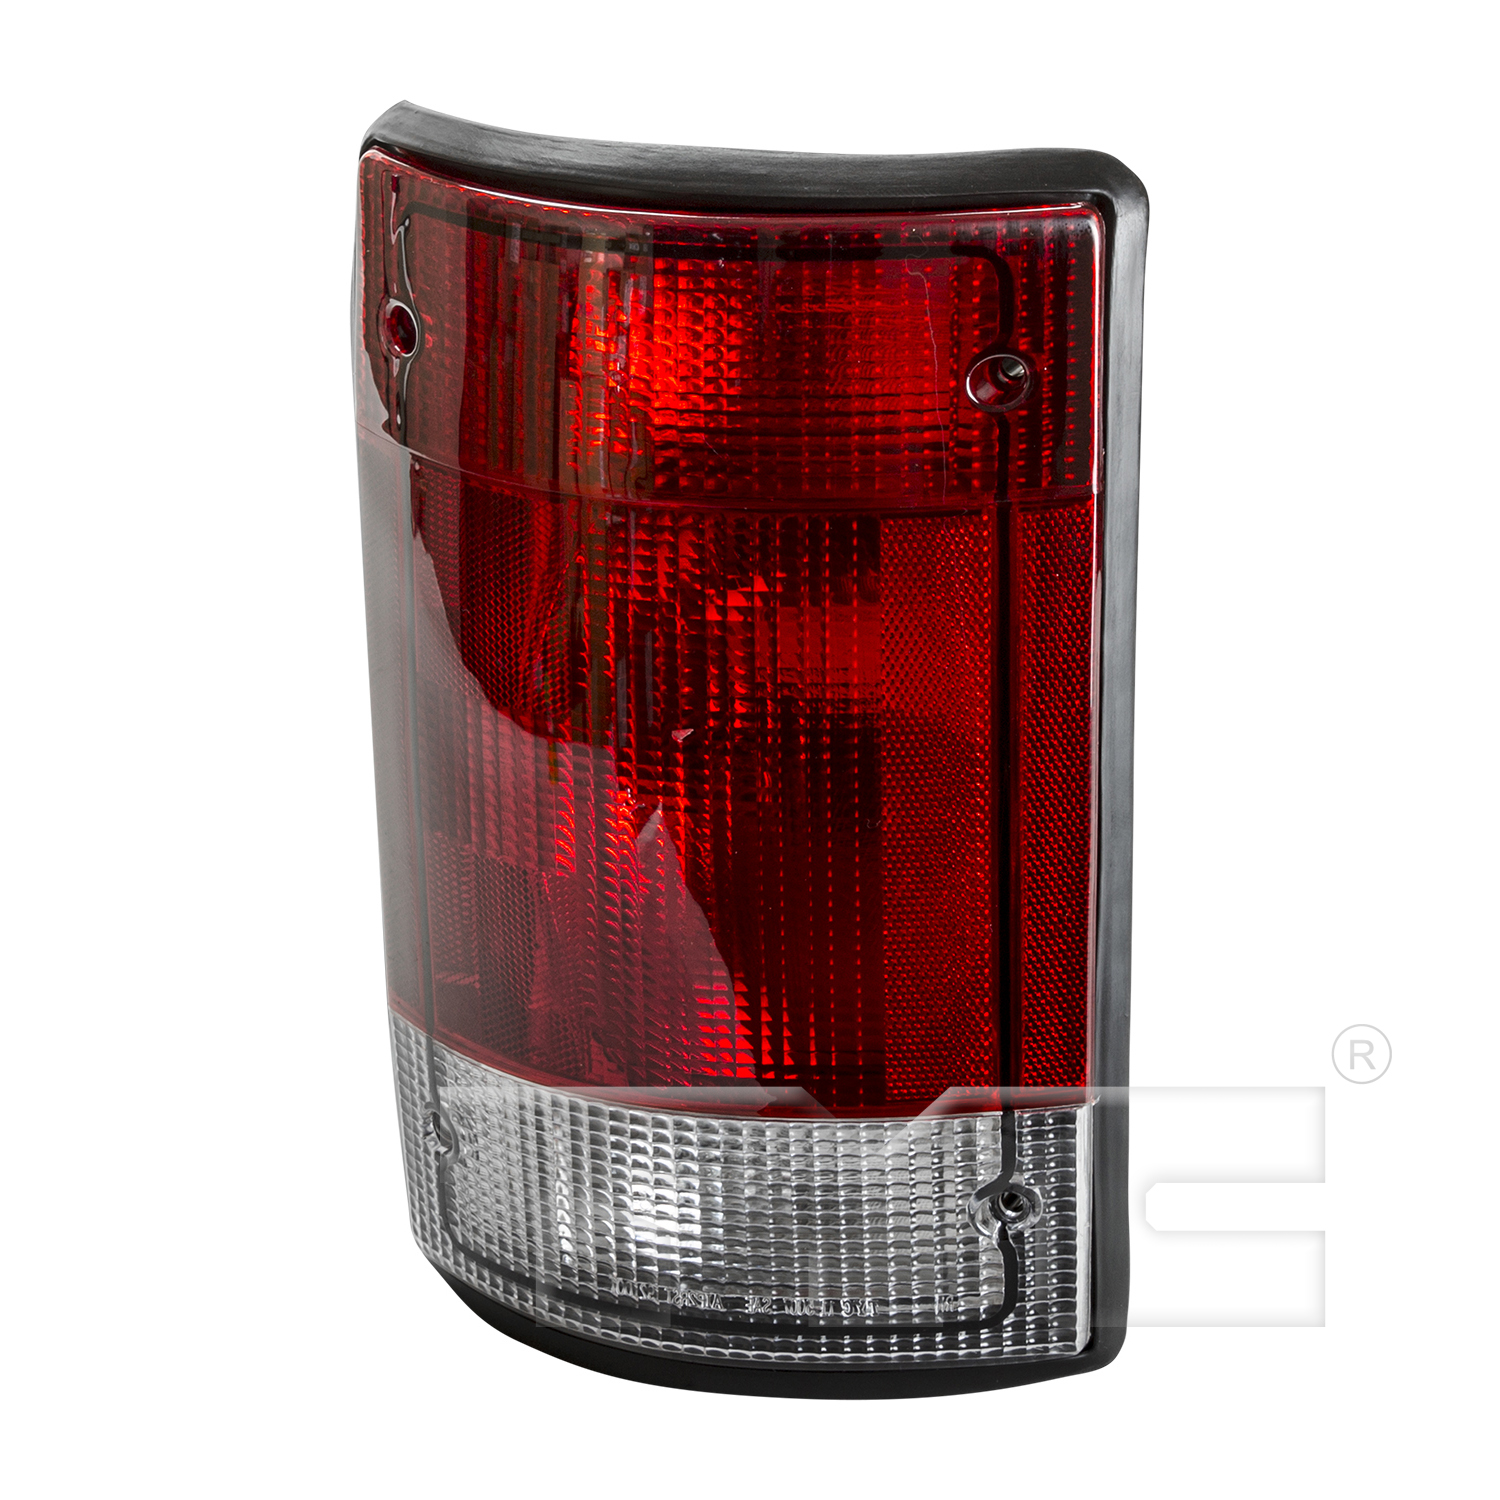 Aftermarket TAILLIGHTS for FORD - E-350 CLUB WAGON, E-350 CLUB WAGON,04-05,LT Taillamp assy